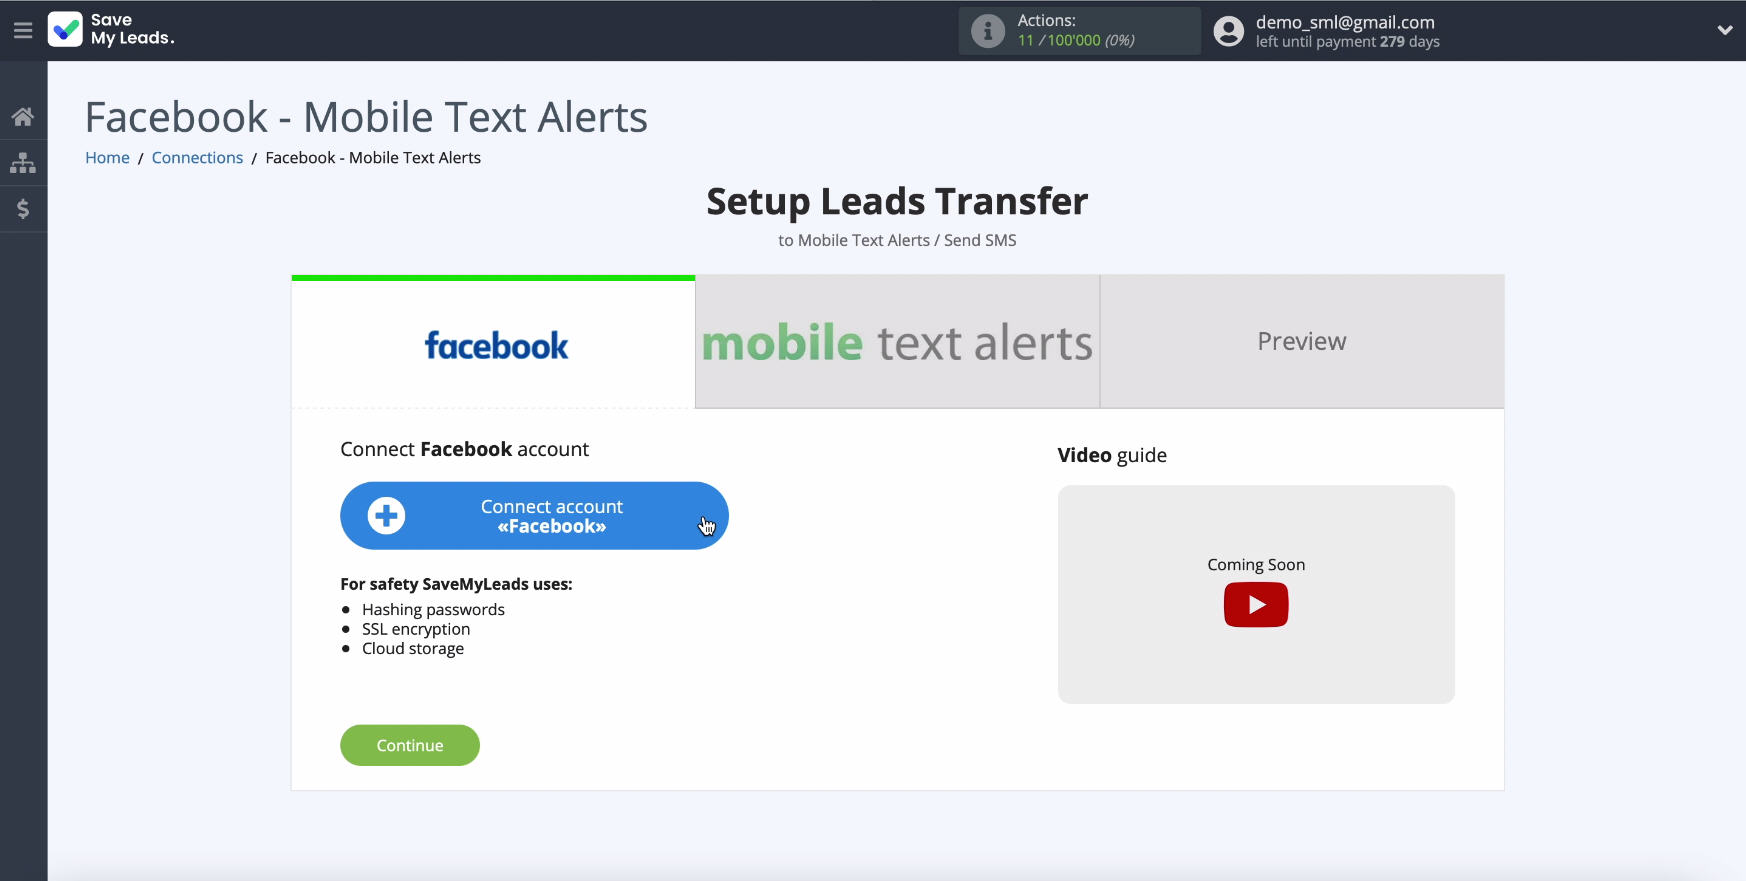 Facebook and Mobile Text Alerts integration | Connect your Facebook account